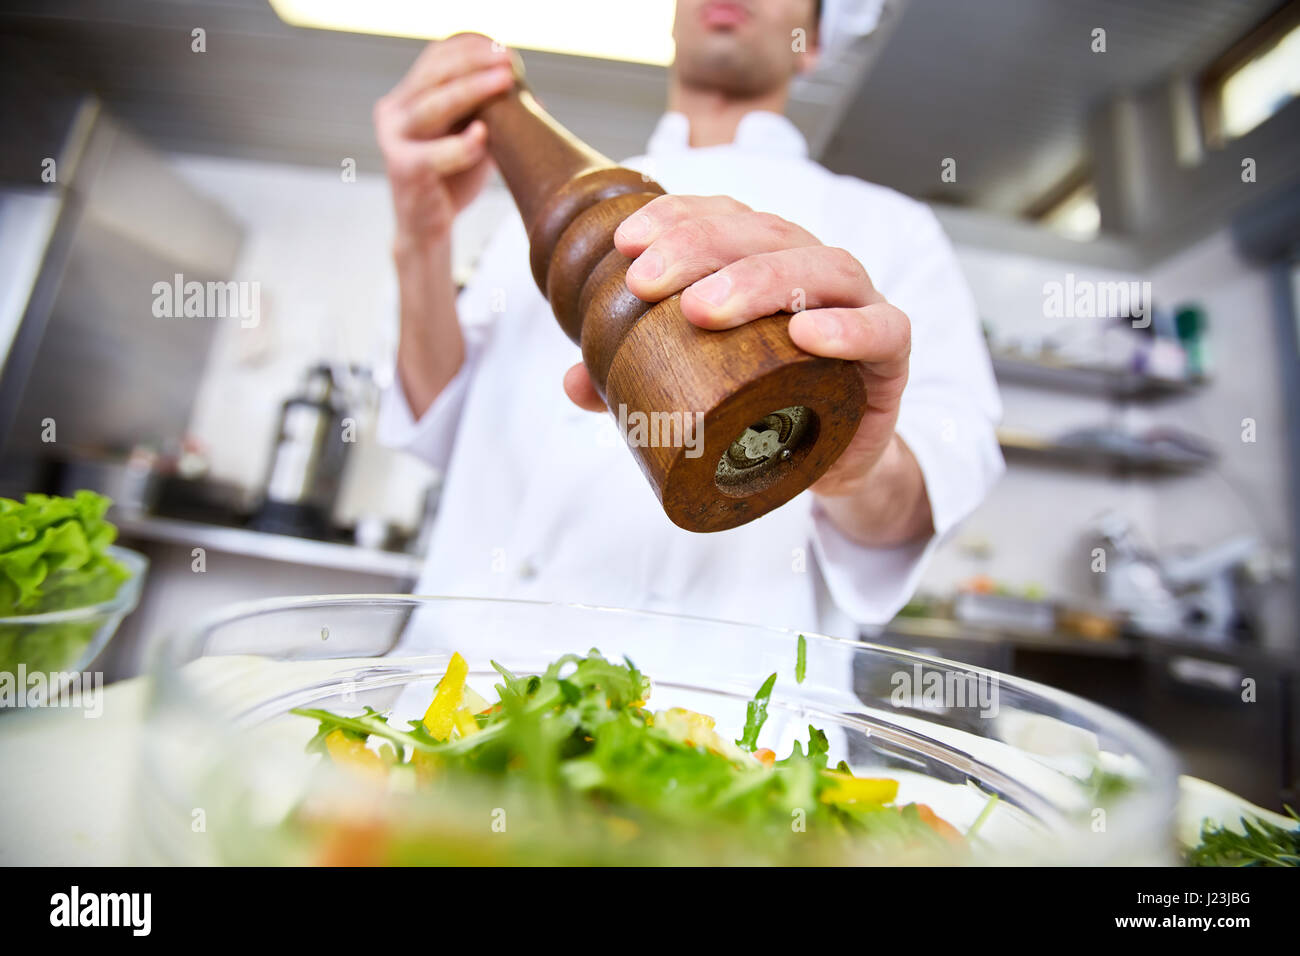 Chef seasoning frsh salad with spices Stock Photo